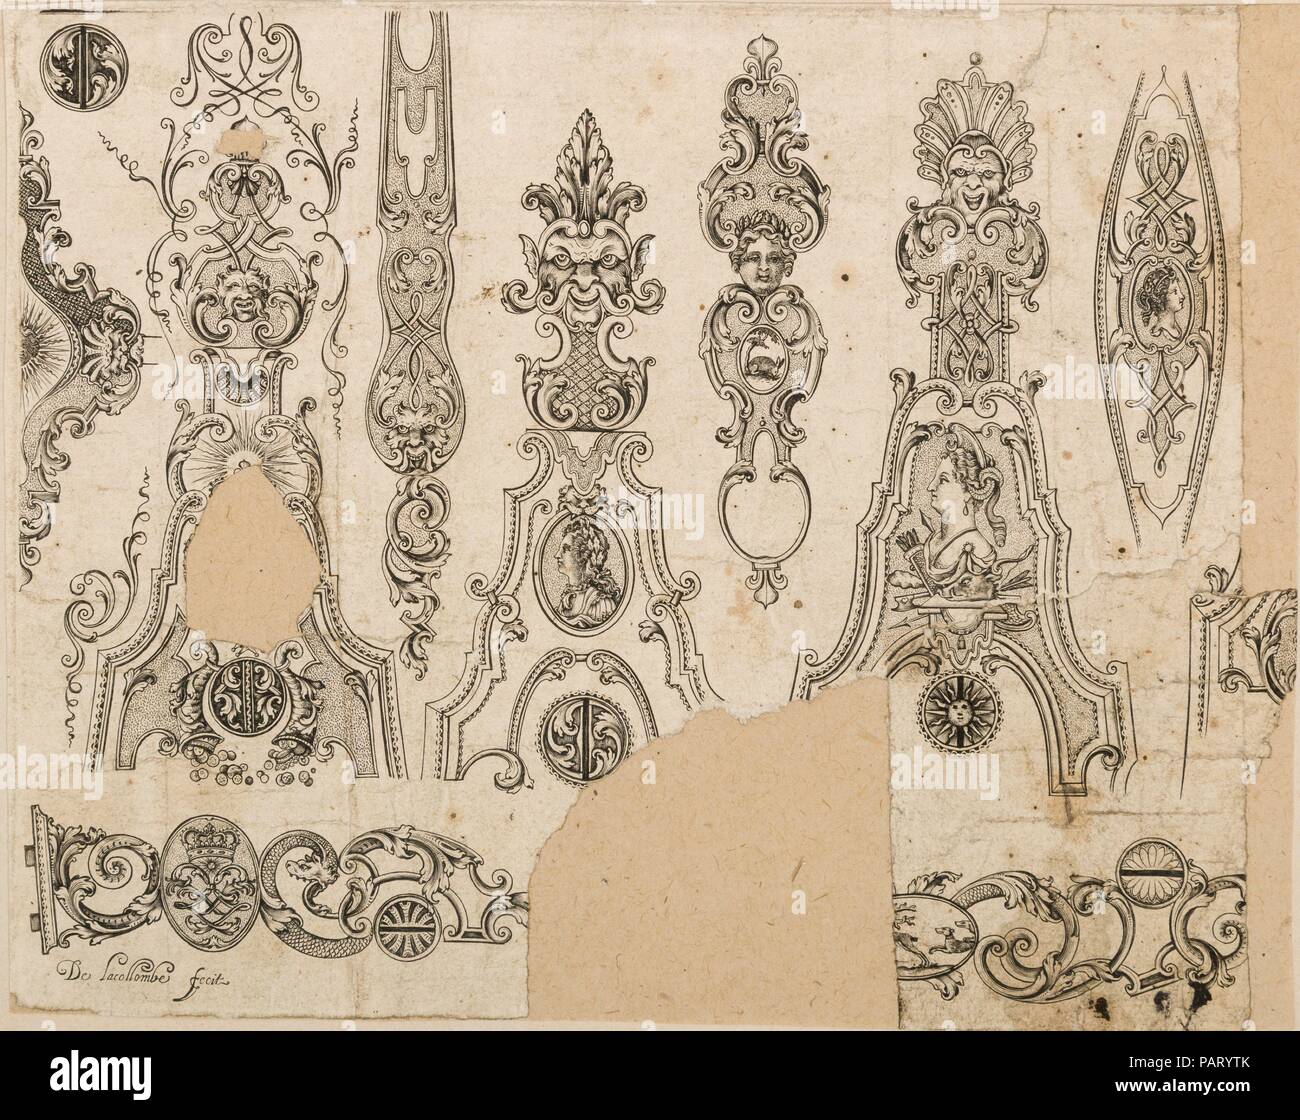 Plate Three from Nouveavx Desseins D'Arquebvseries. Culture: French, Paris. Dimensions: sheet: 8 x 6 3/8 in. (20.3 x 16.2 cm). Engraver: De Lacollombe (French, Paris, active ca. 1702-ca. 1736). Date: ca. 1730.  The beautiful and inventive ornament designs in pattern books were intended for the practical needs of artists and craftsman. Some, like this example, are literally shopworn, showing stains and other damage from use in an active workshop. Museum: Metropolitan Museum of Art, New York, USA. Stock Photo